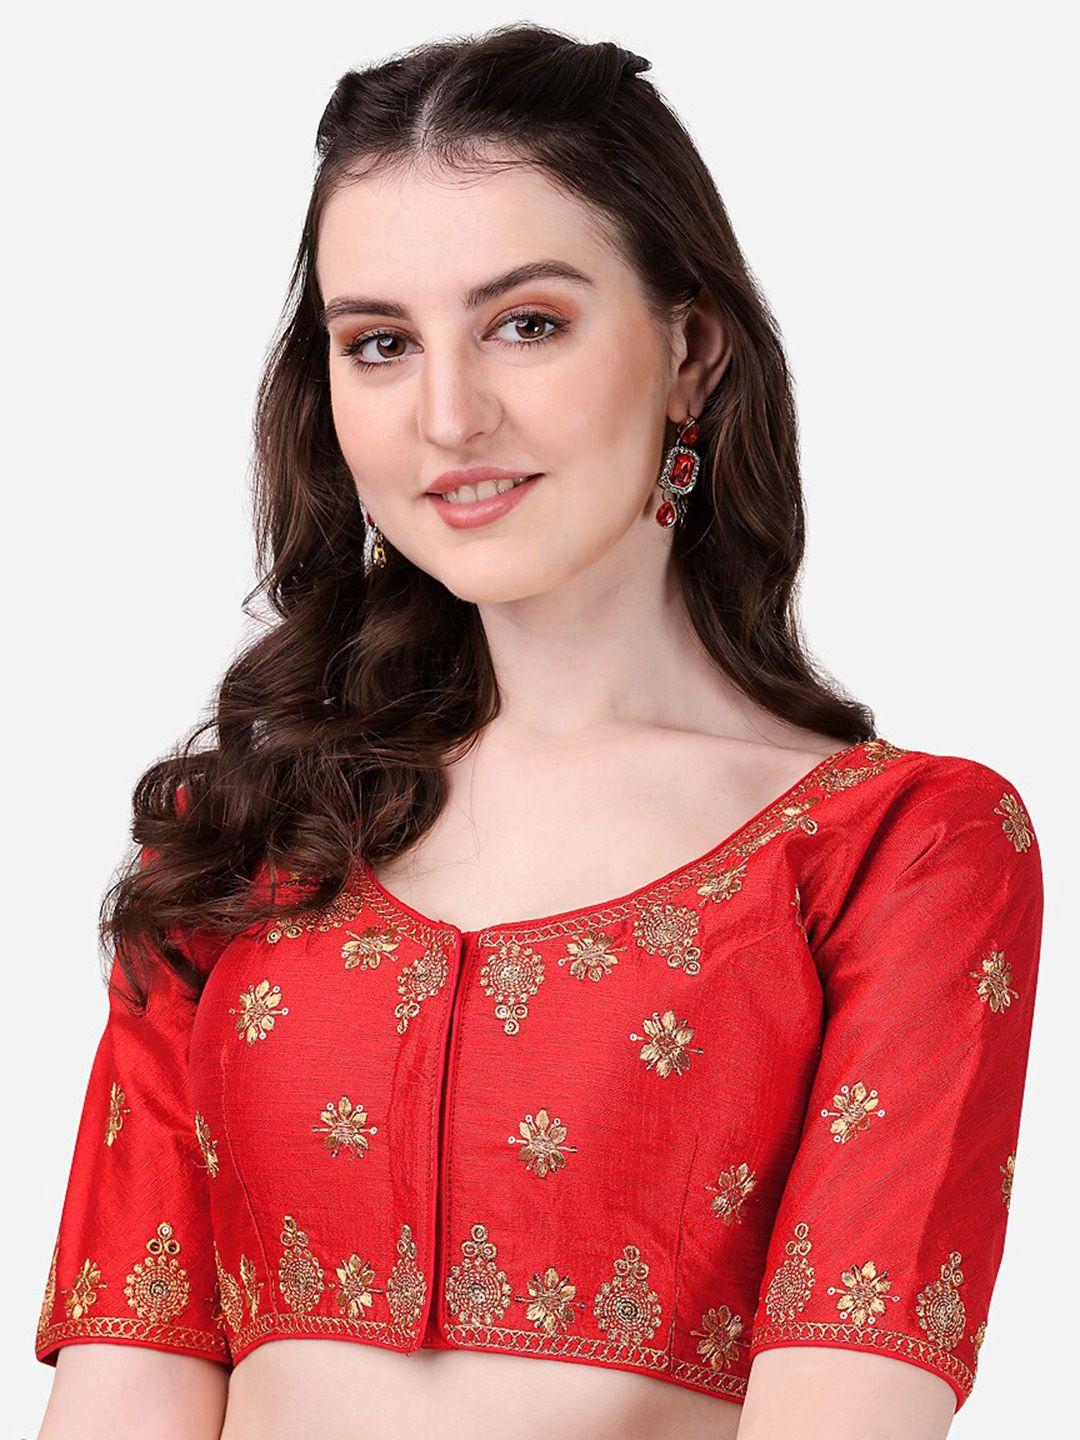 pujia mills red & golden embroidered saree blouse